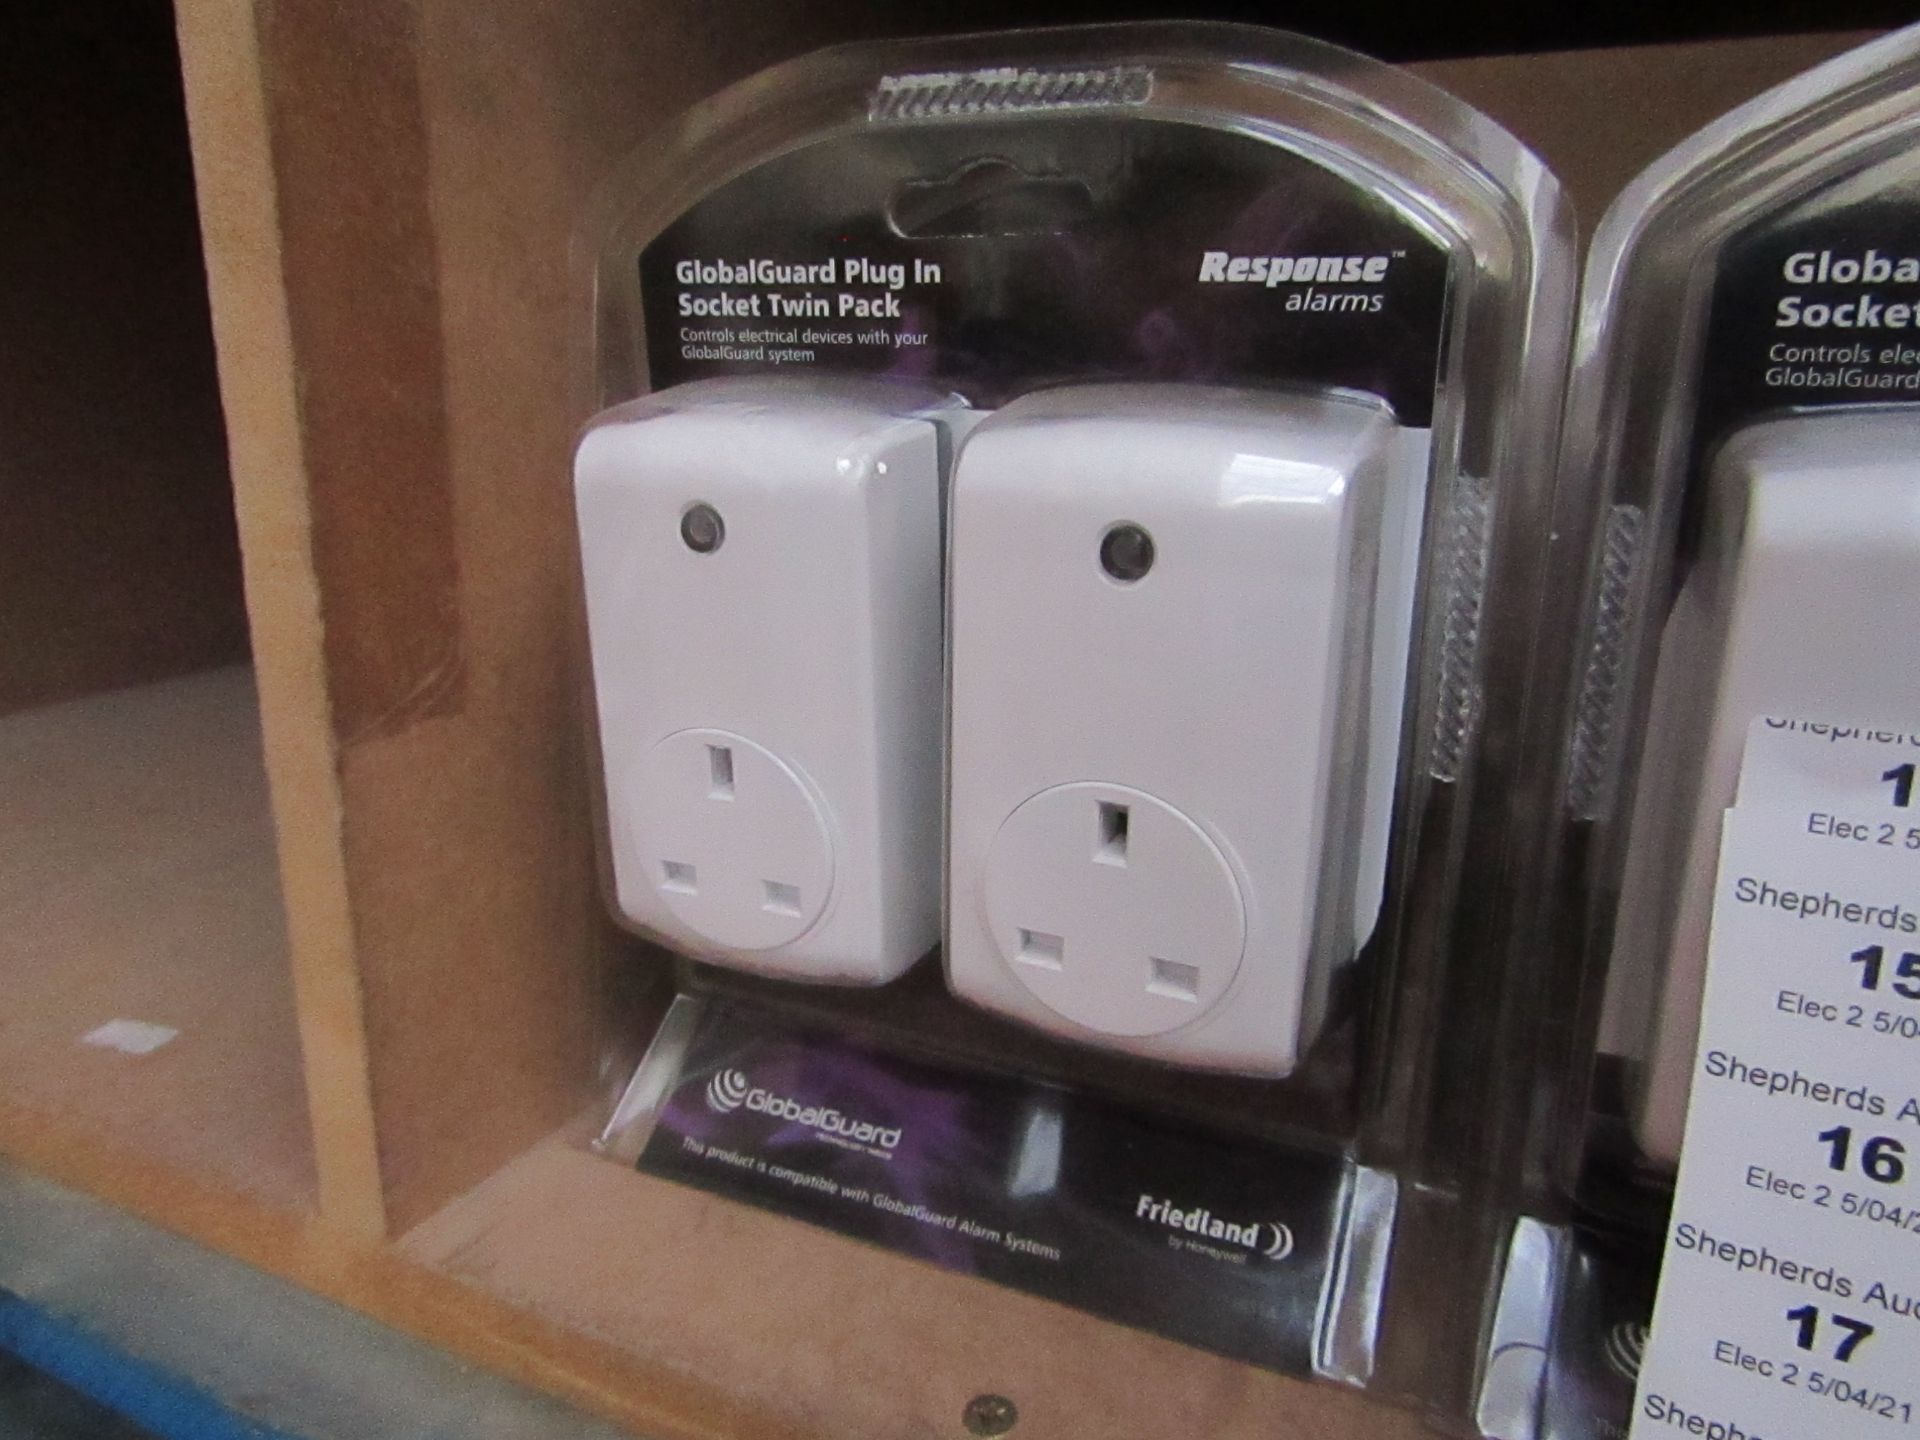 GlobalGuard Plug in Socket Twin Pack compatable with Global Alarm systems new & packaged